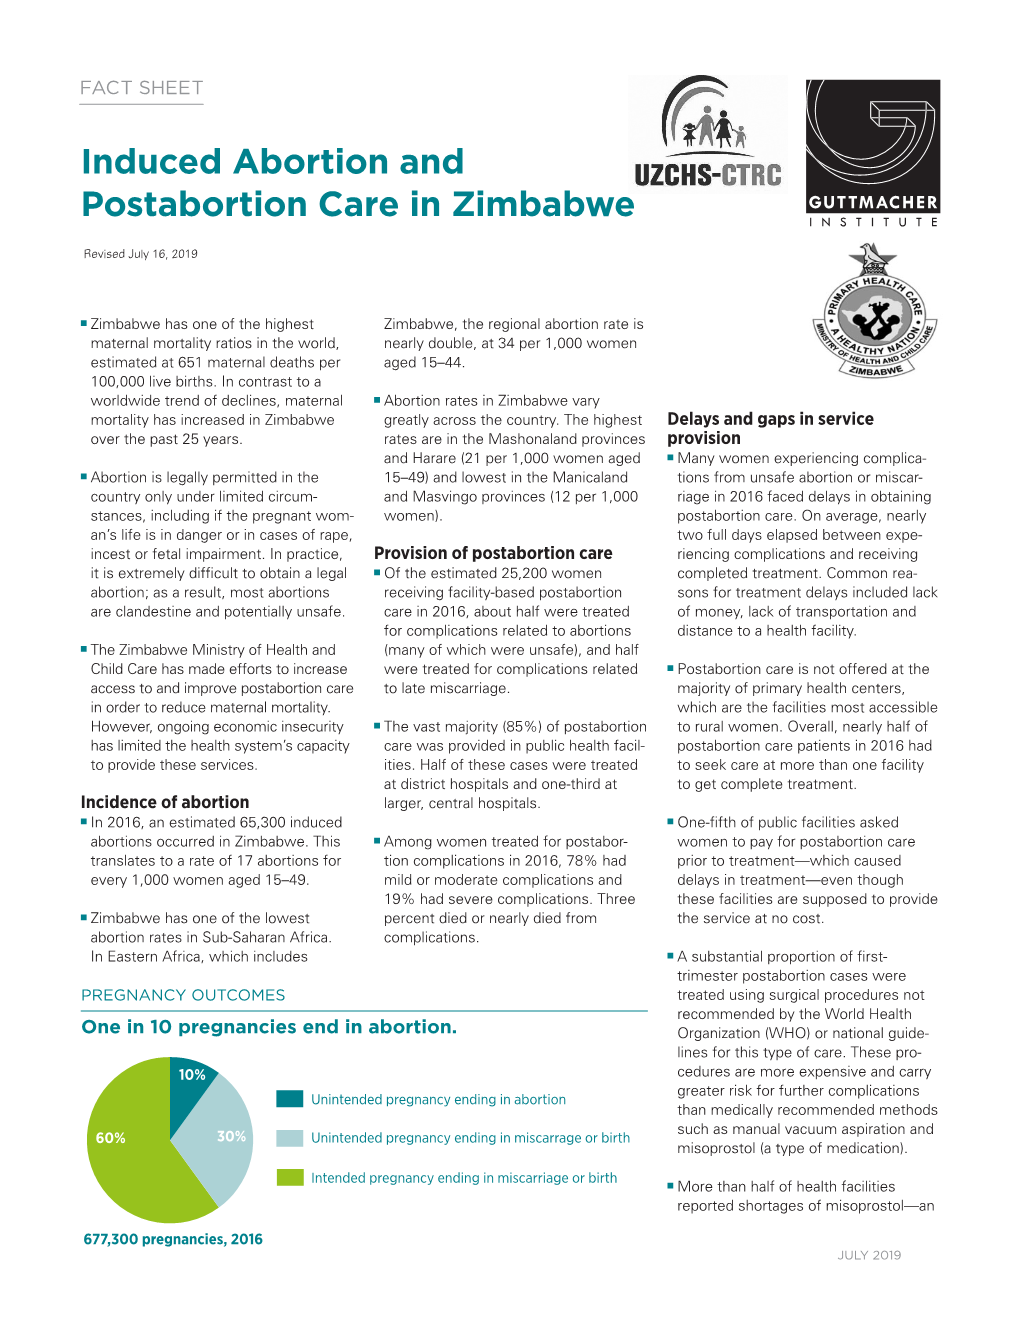 Induced Abortion and Postabortion Care in Zimbabwe